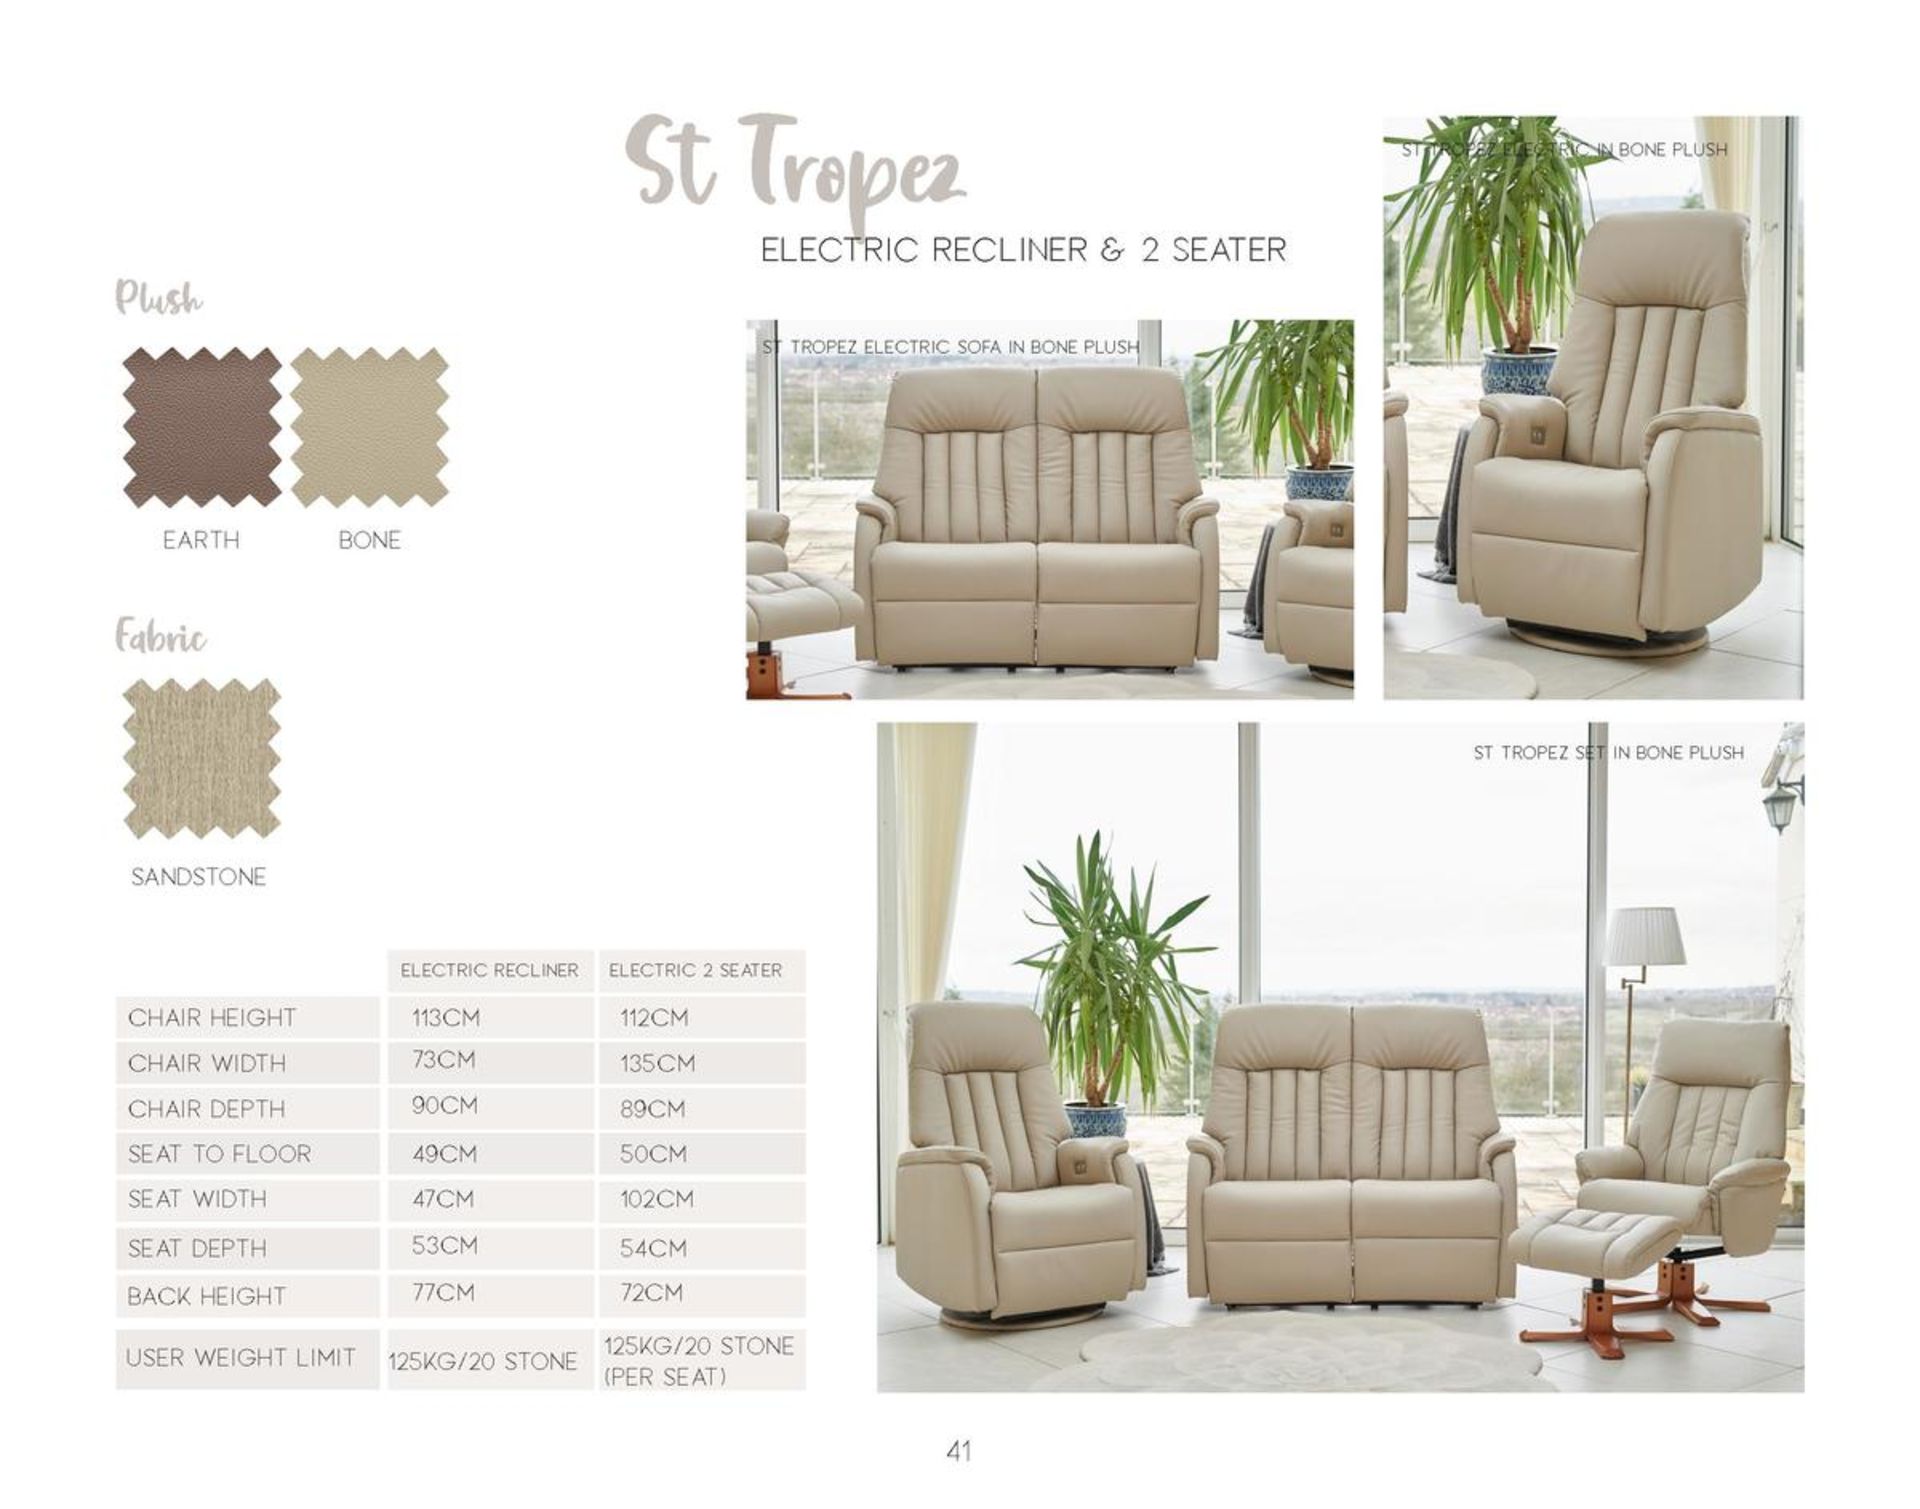 Brand new boxed 2 seater gfa st tropez electric reclining sofa in bone leather , The st tropez is